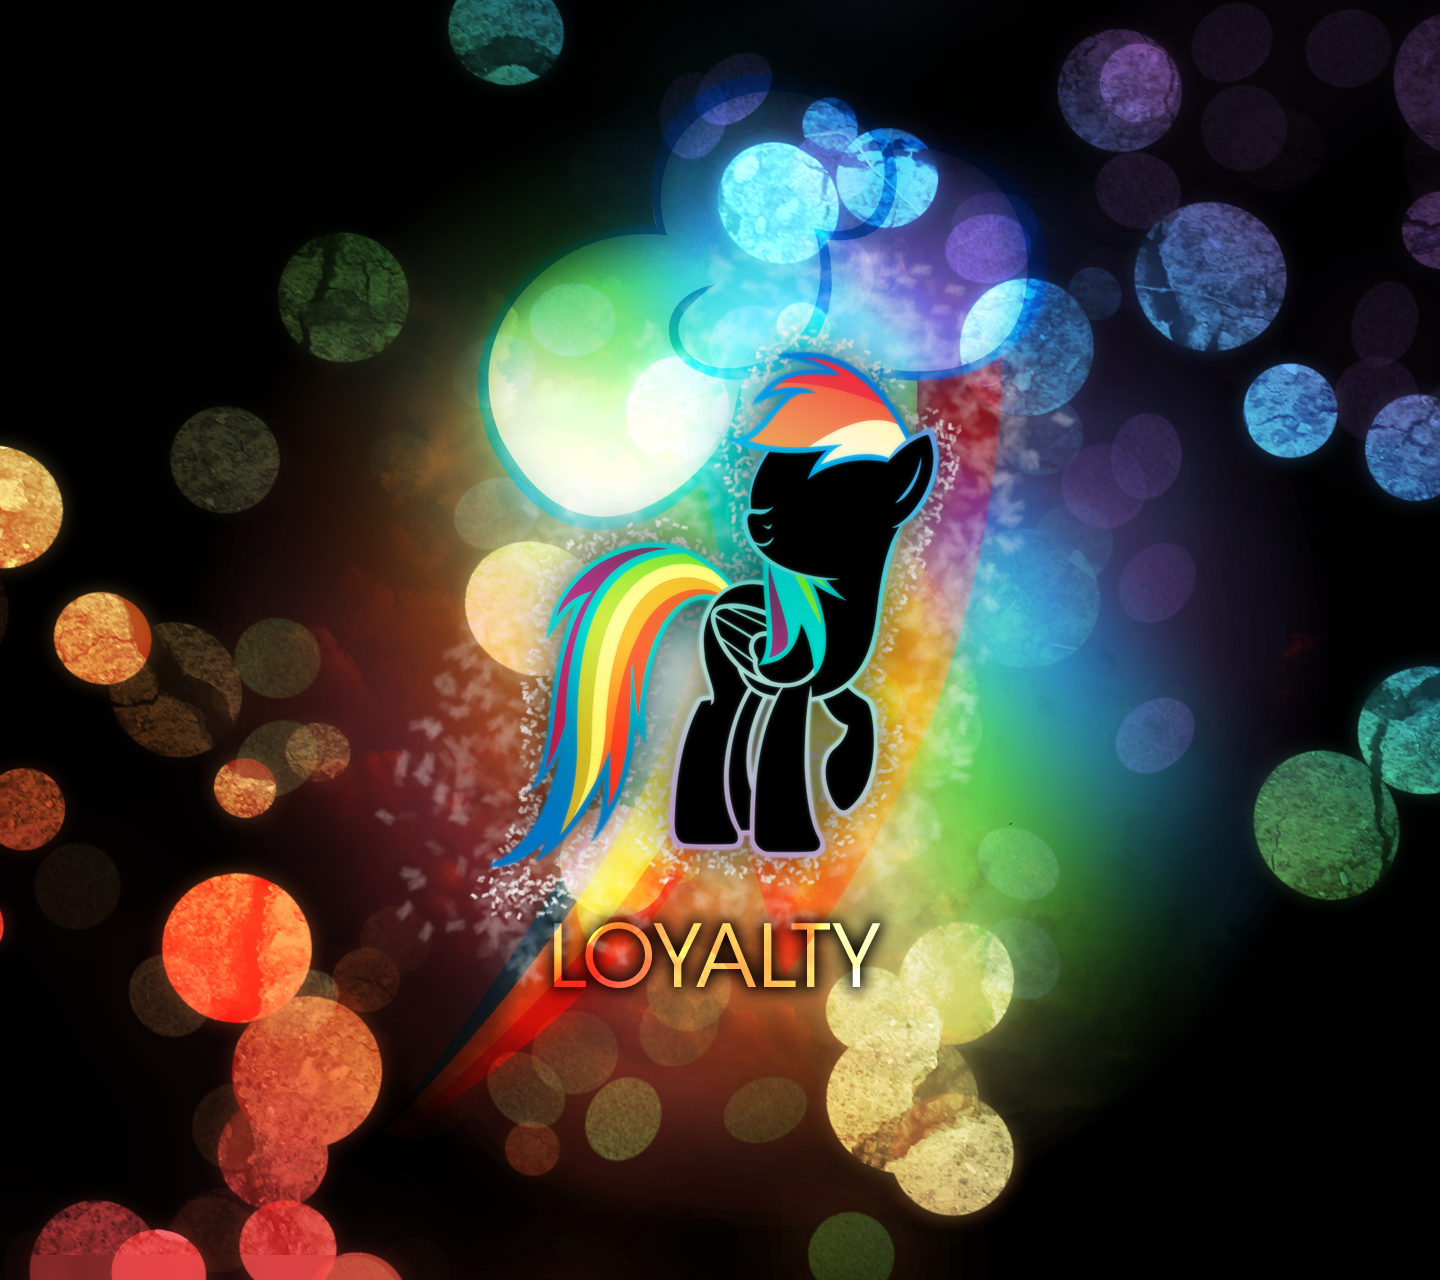 Spectrum of Loyalty {Android Version} by Bernd01 and KibbieTheGreat